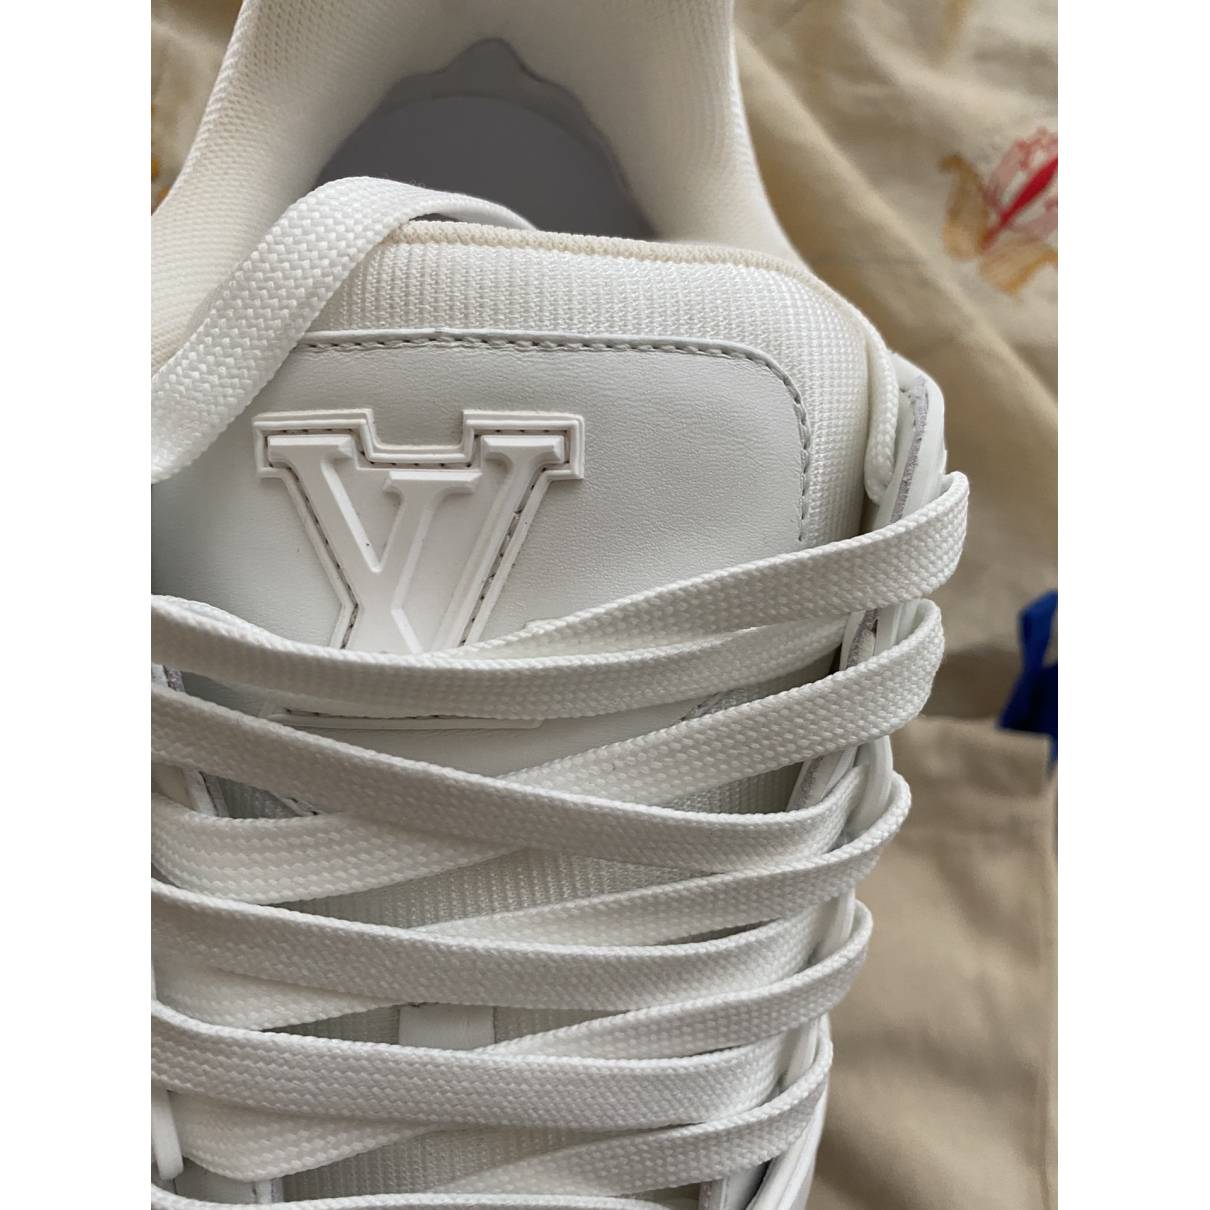 Lv trainer leather high trainers Louis Vuitton White size 7.5 UK in Leather  - 32994389